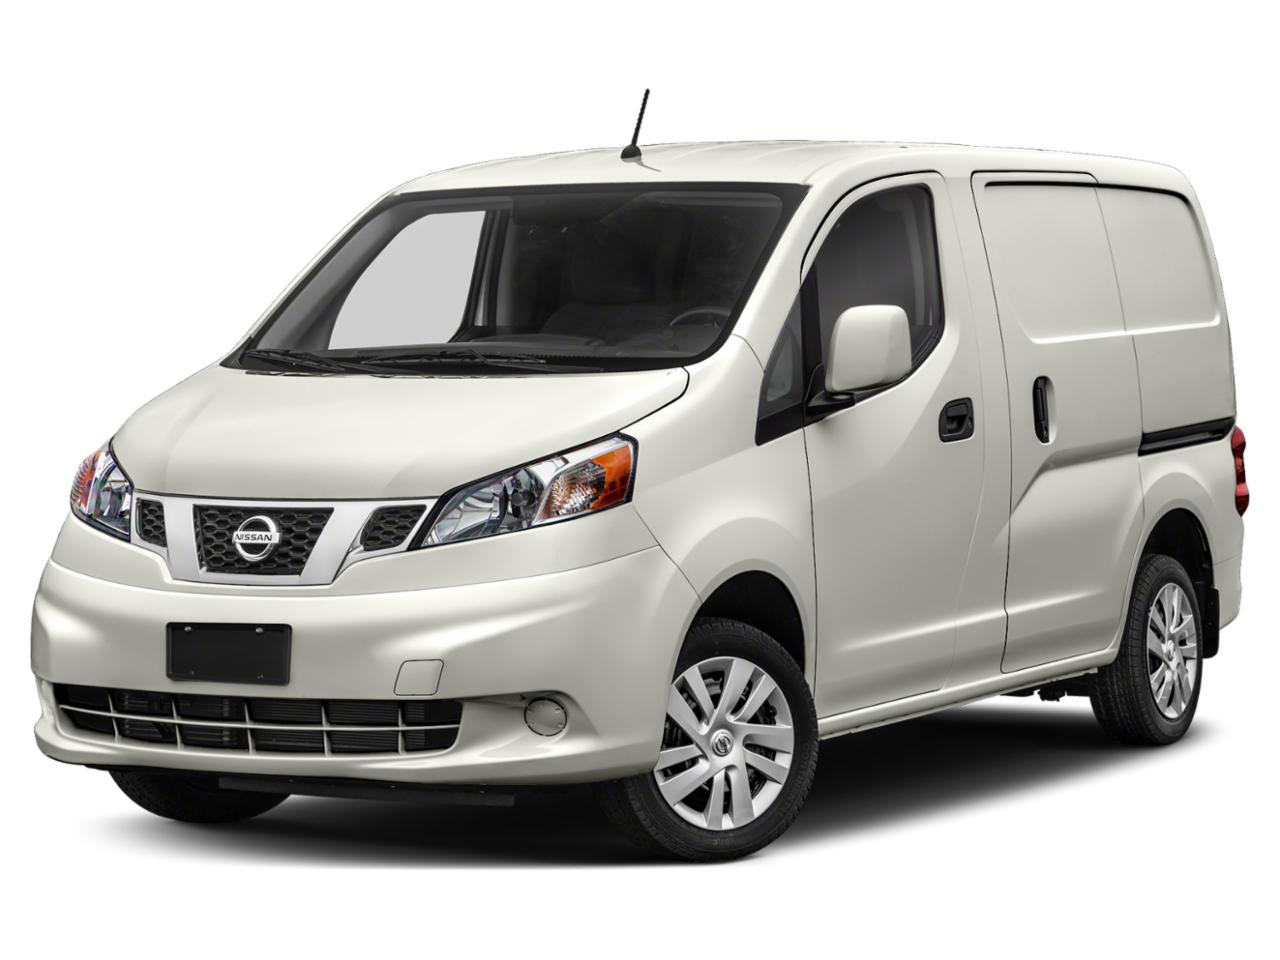 2020 Nissan NV200 Compact Cargo Vehicle Photo in SELMA, TX 78154-1459